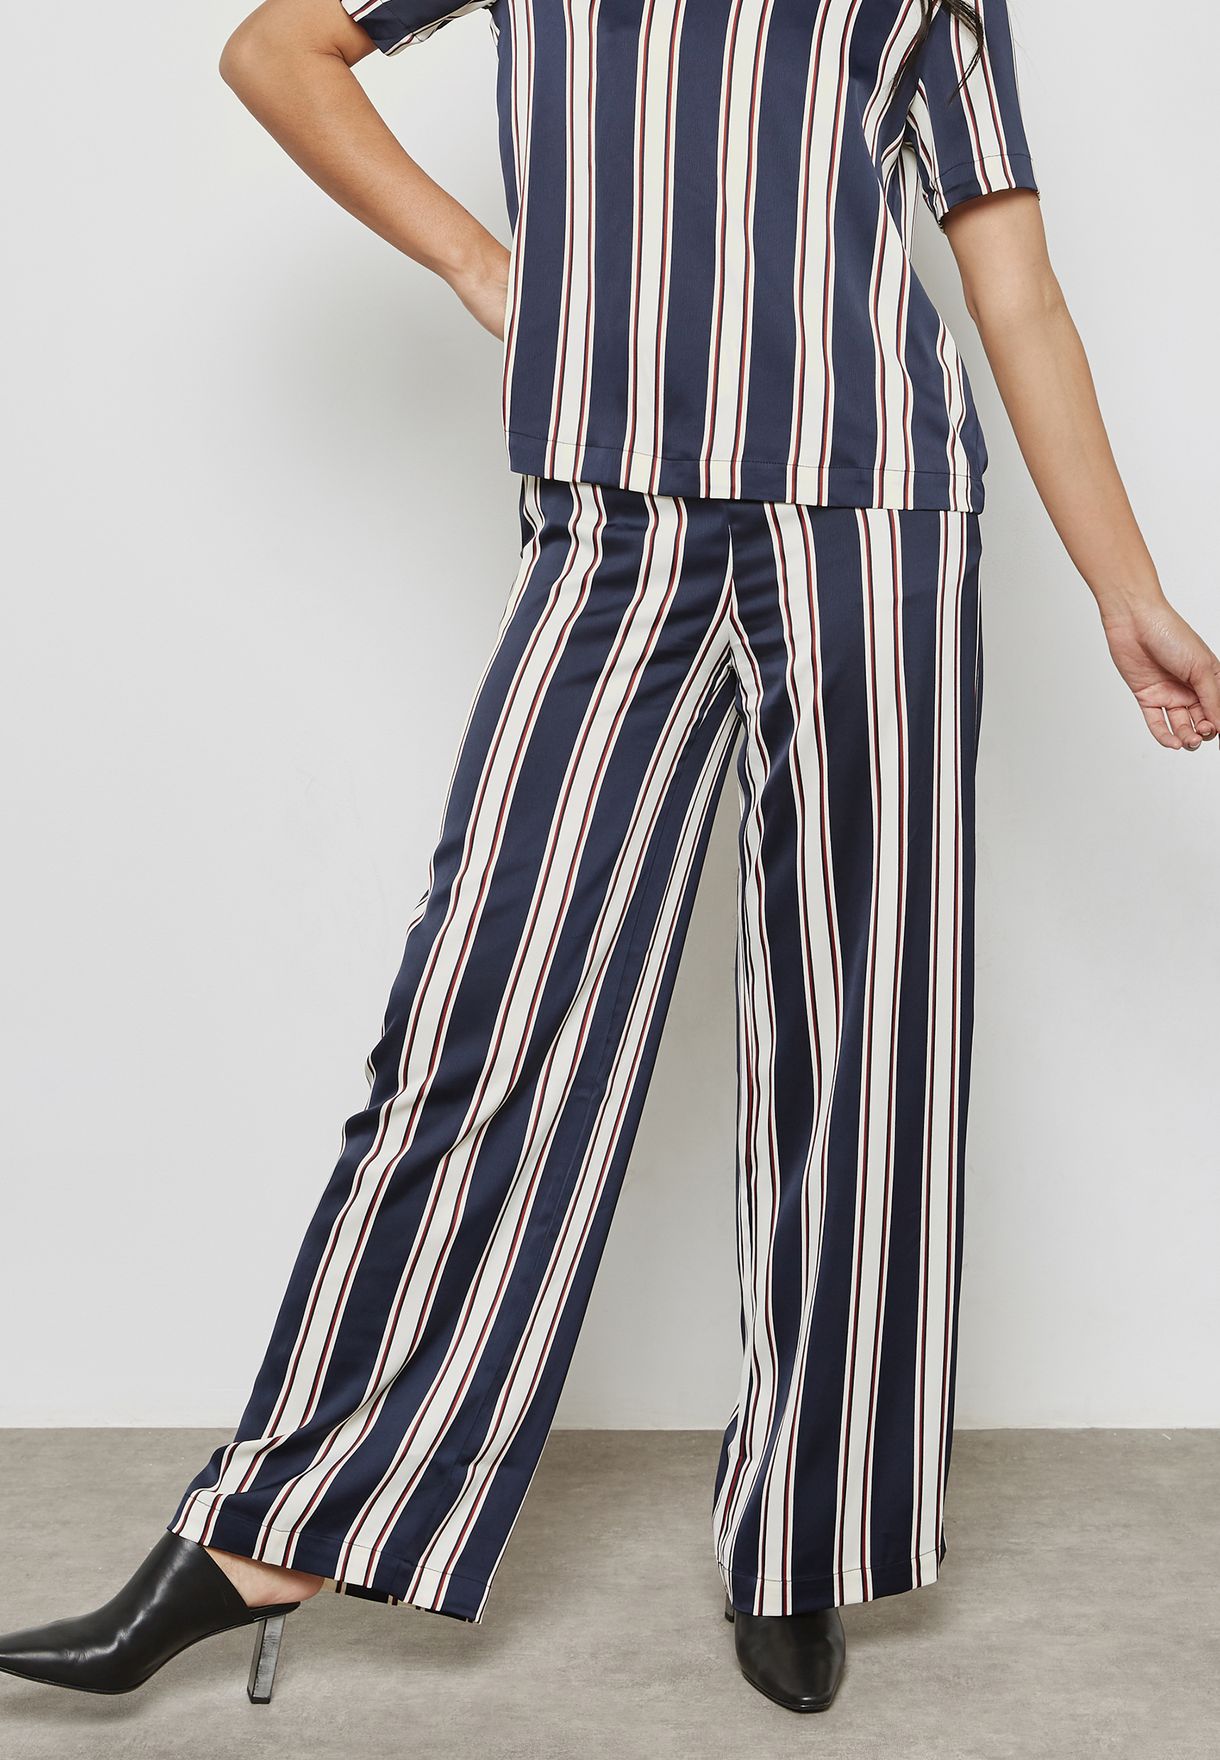 Buy Moda stripes Striped High Waist Pants for in Muscat, other cities | 10191750